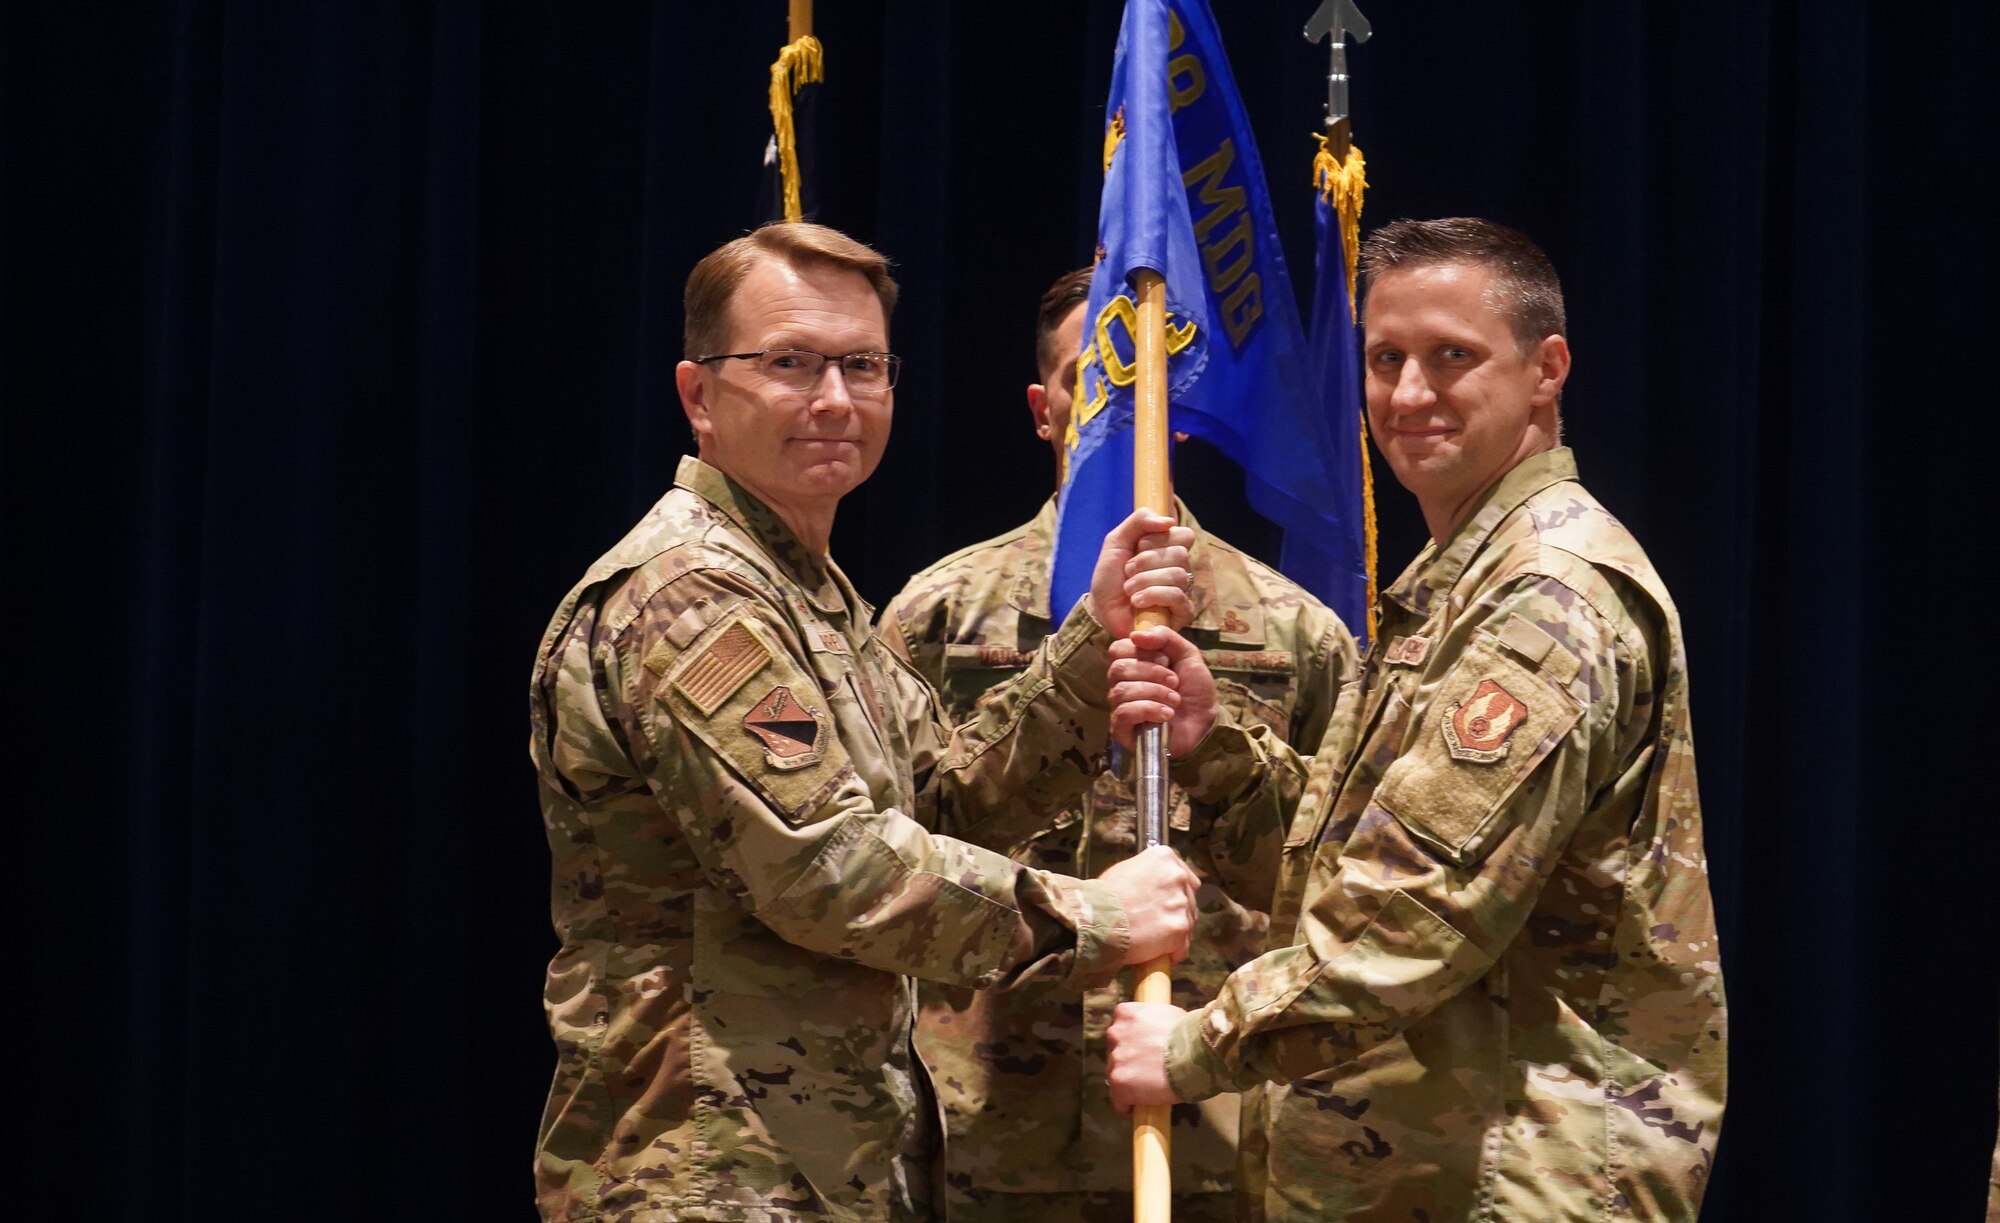 Harrell presents the 88th Healthcare Operations Squadron guidon to Palmer.